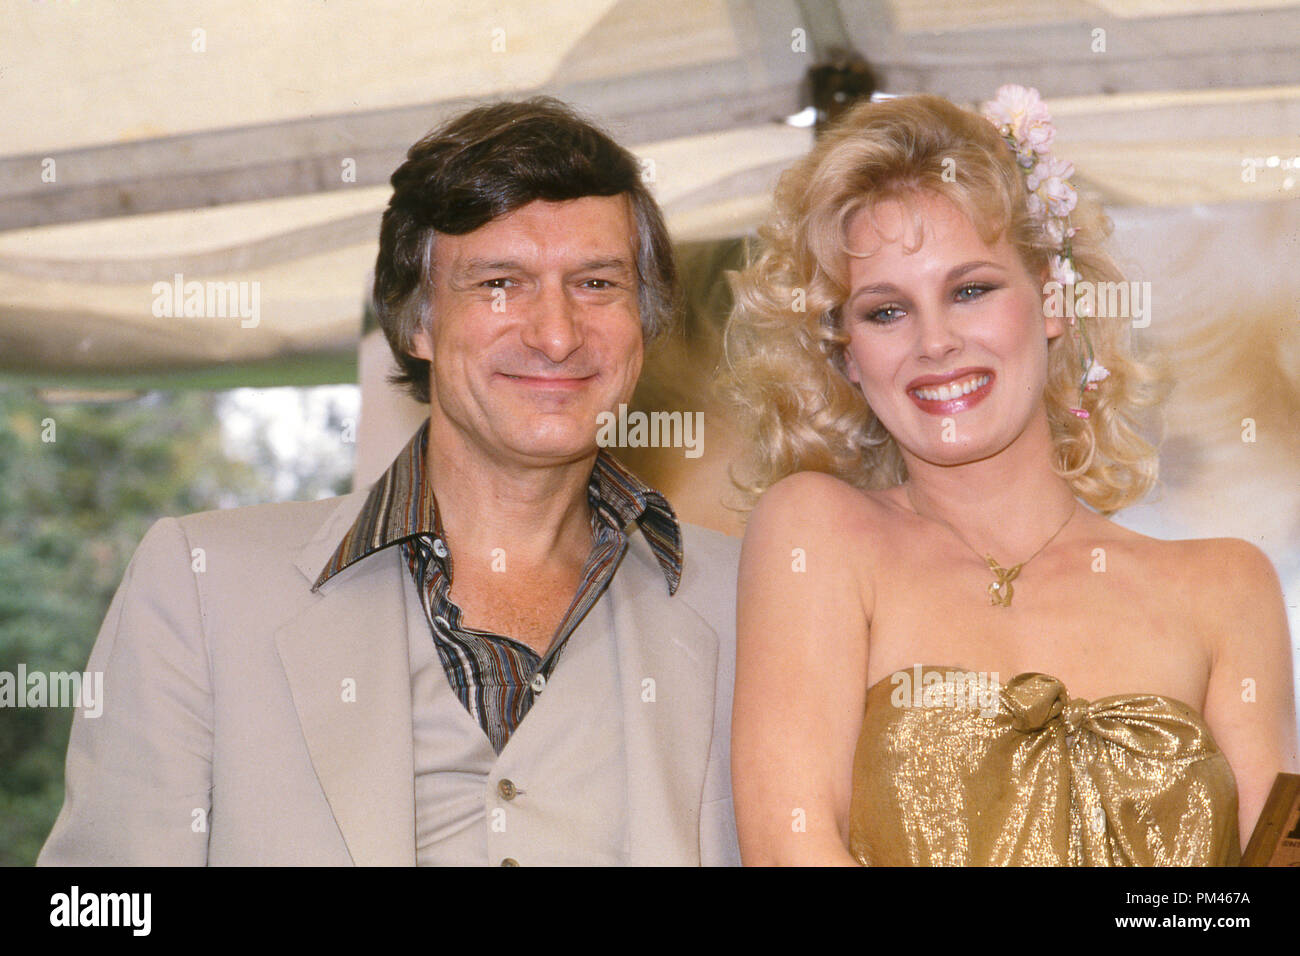 Hugh Hefner awards Dorothy Stratten Playboy Playmate of the Year,1979. File Reference #1060 011THA © JRC /The Hollywood Archive - All Rights Reserved. Stock Photo